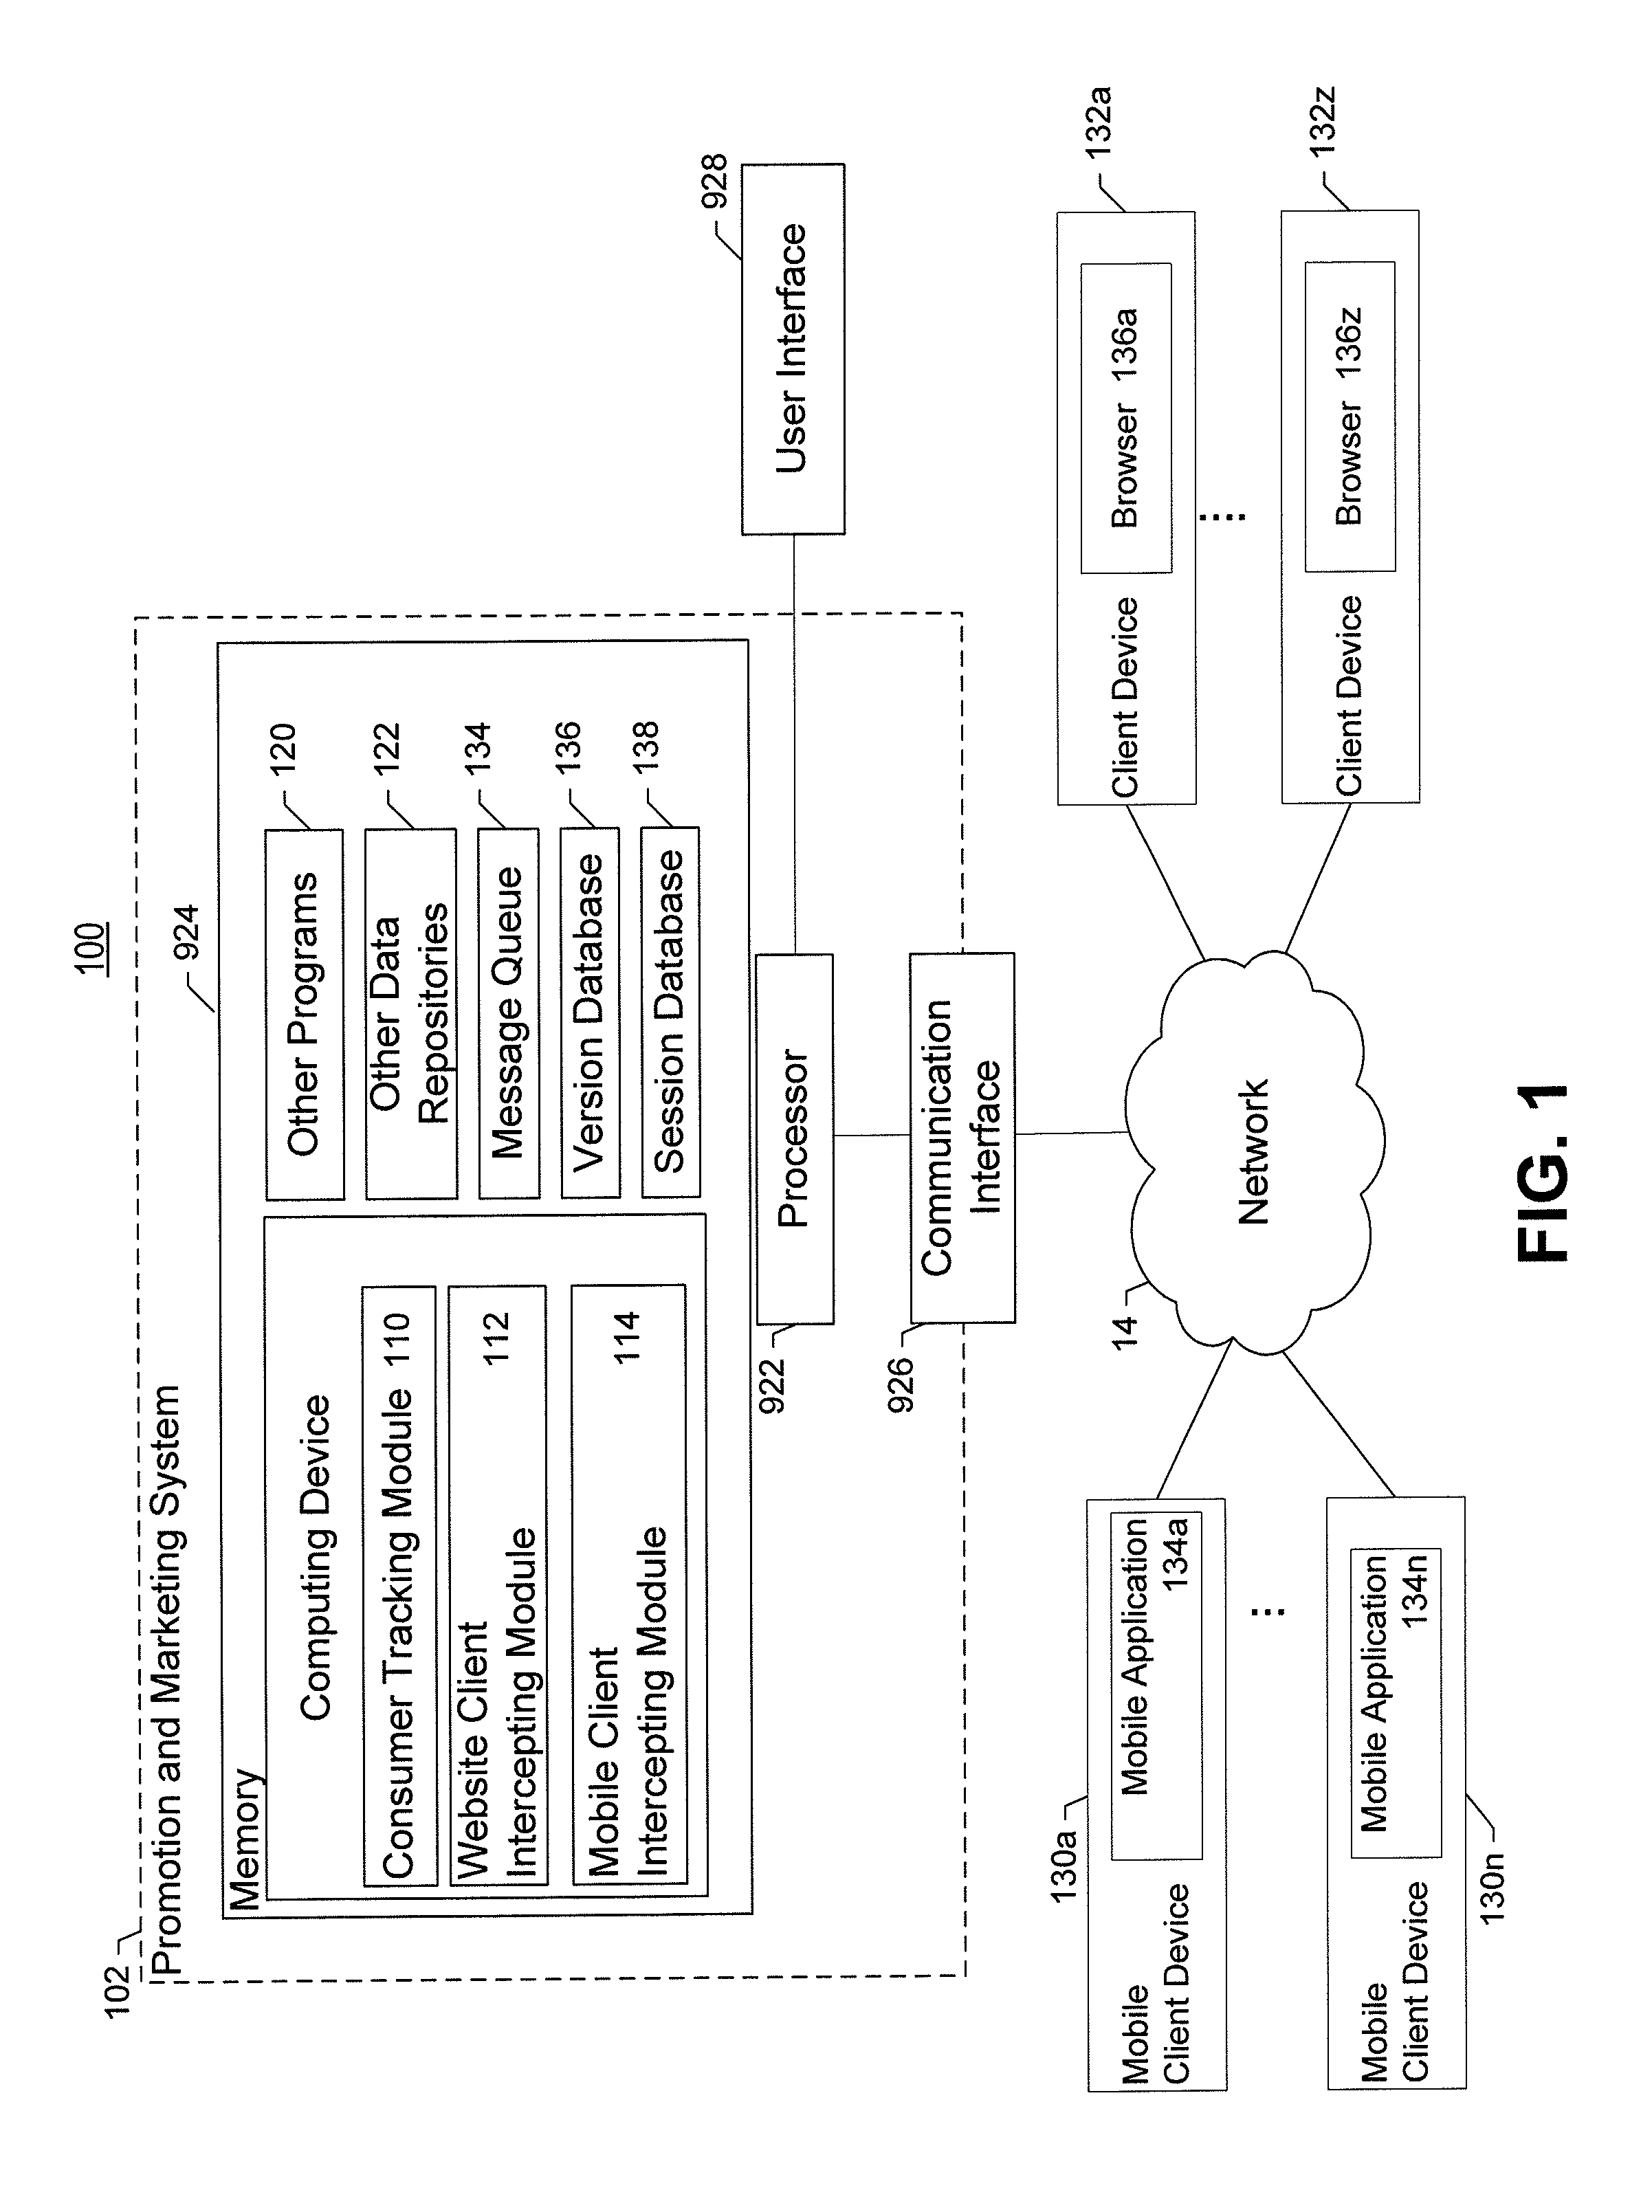 Method, apparatus, and computer program product for consumer tracking